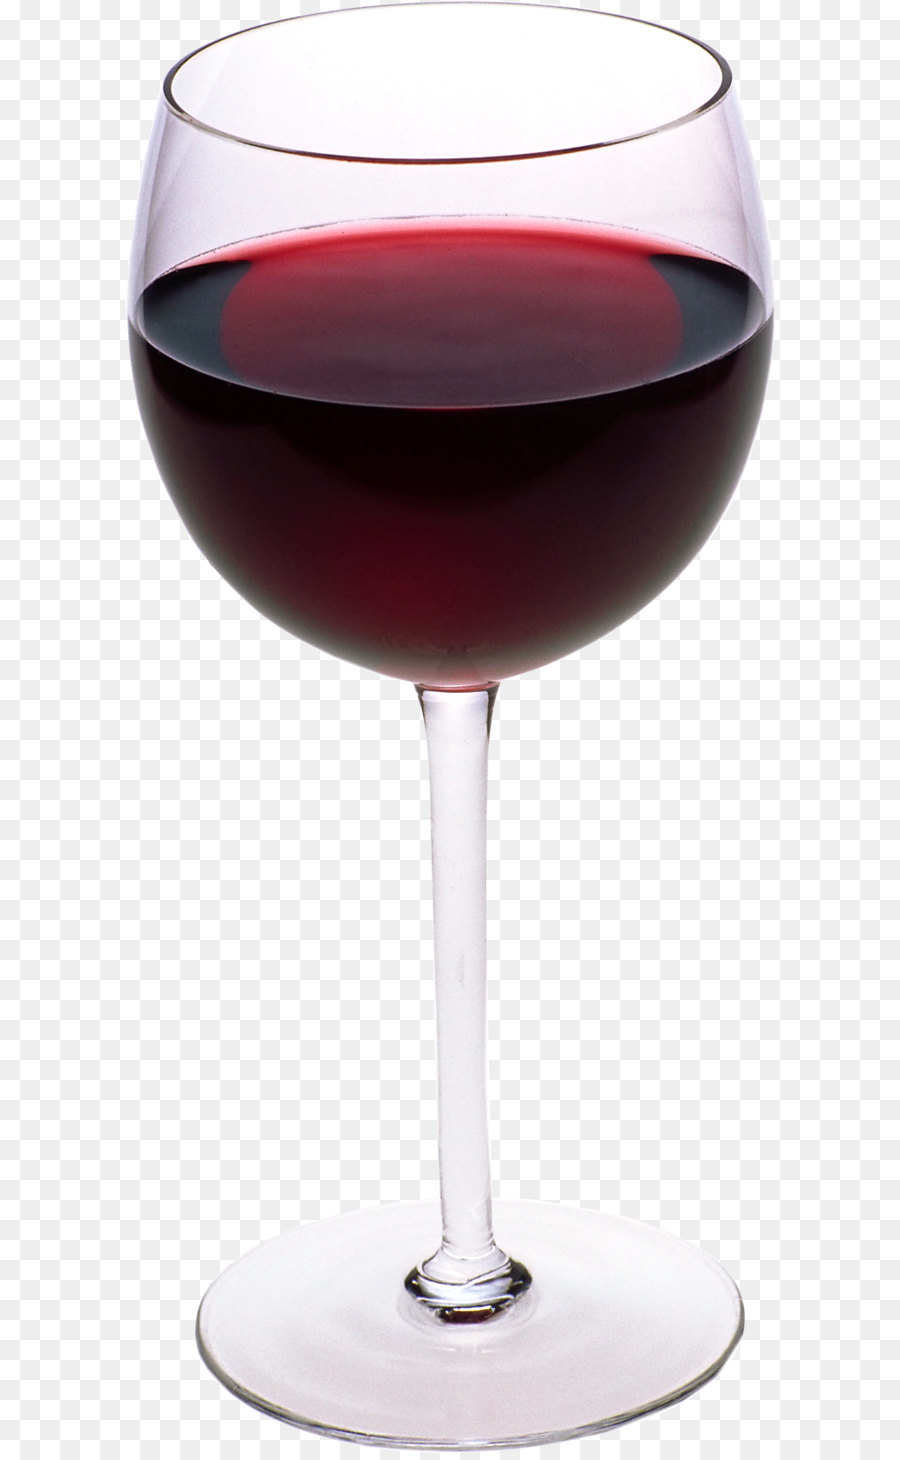 Red Wine Cocktail Wine glass - Glass PNG image png download - 1060*2370 - Free Transparent Red Wine png Download.